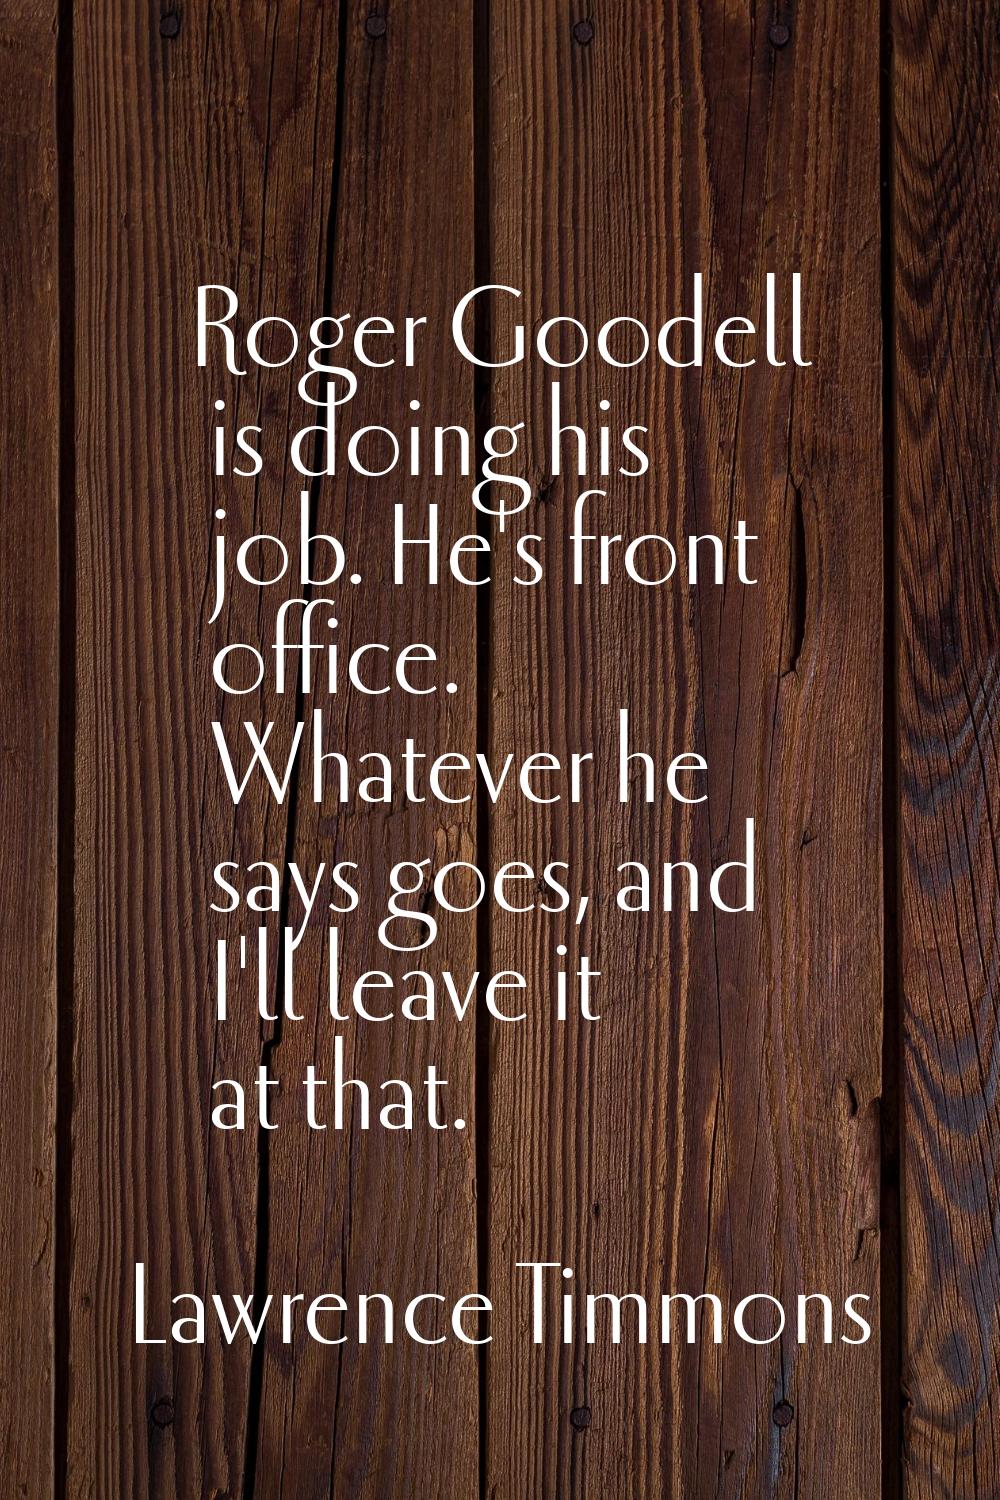 Roger Goodell is doing his job. He's front office. Whatever he says goes, and I'll leave it at that